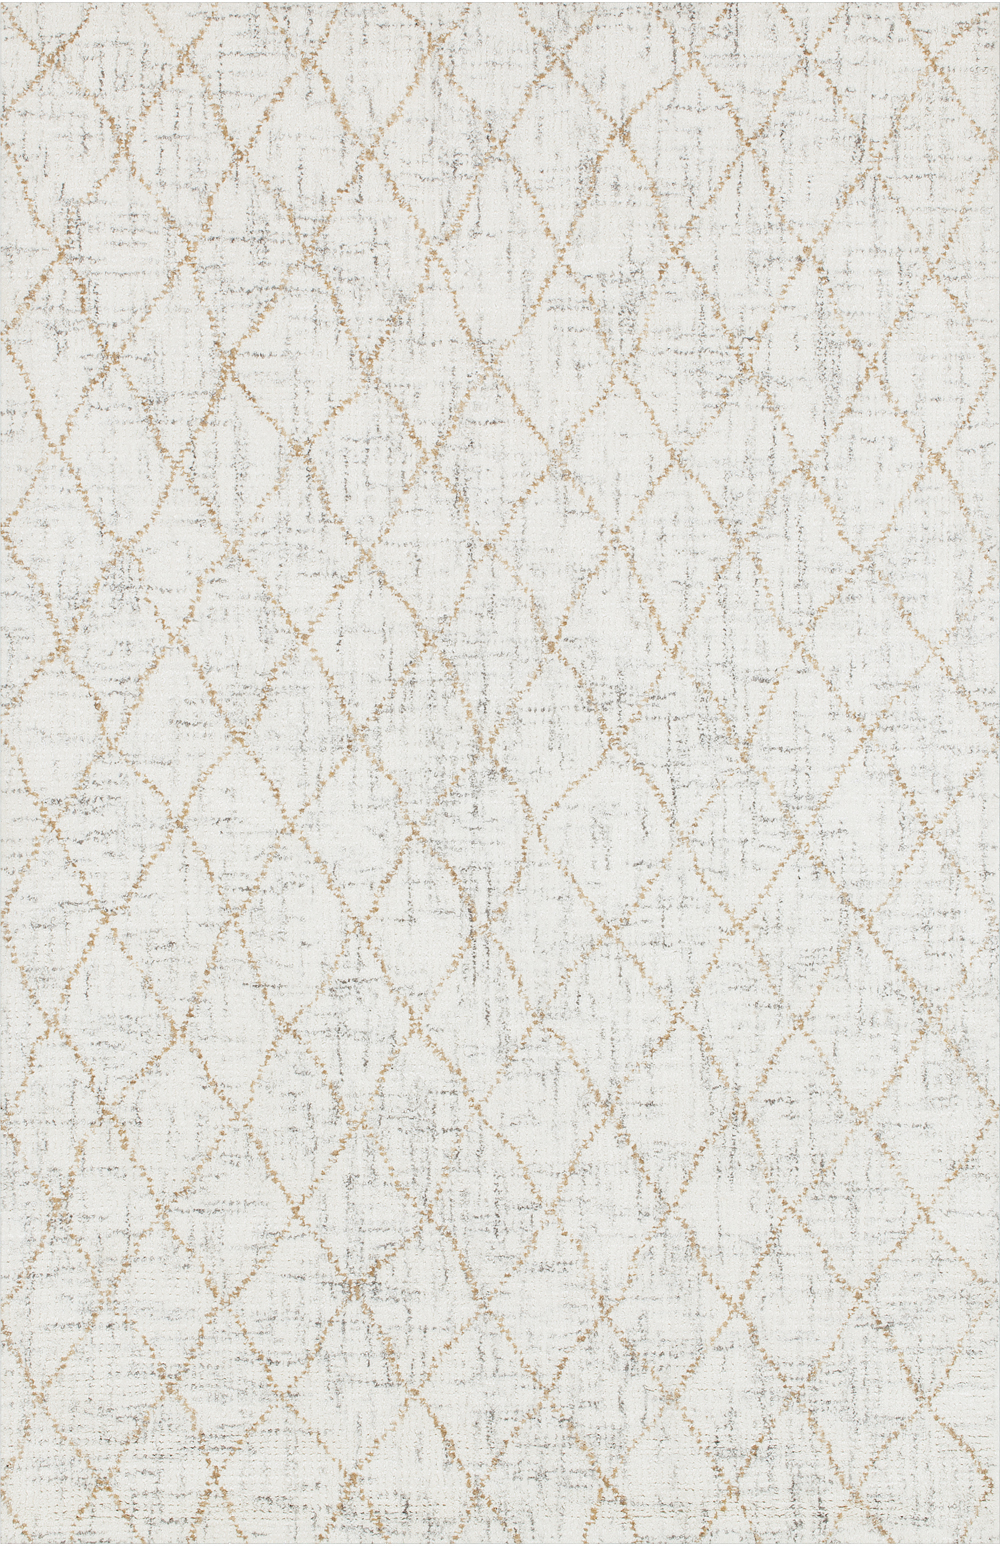 Contemporary & Transitional Rugs Alexis AX-15 Cream Lt. Grey - Grey Hand Tufted Rug